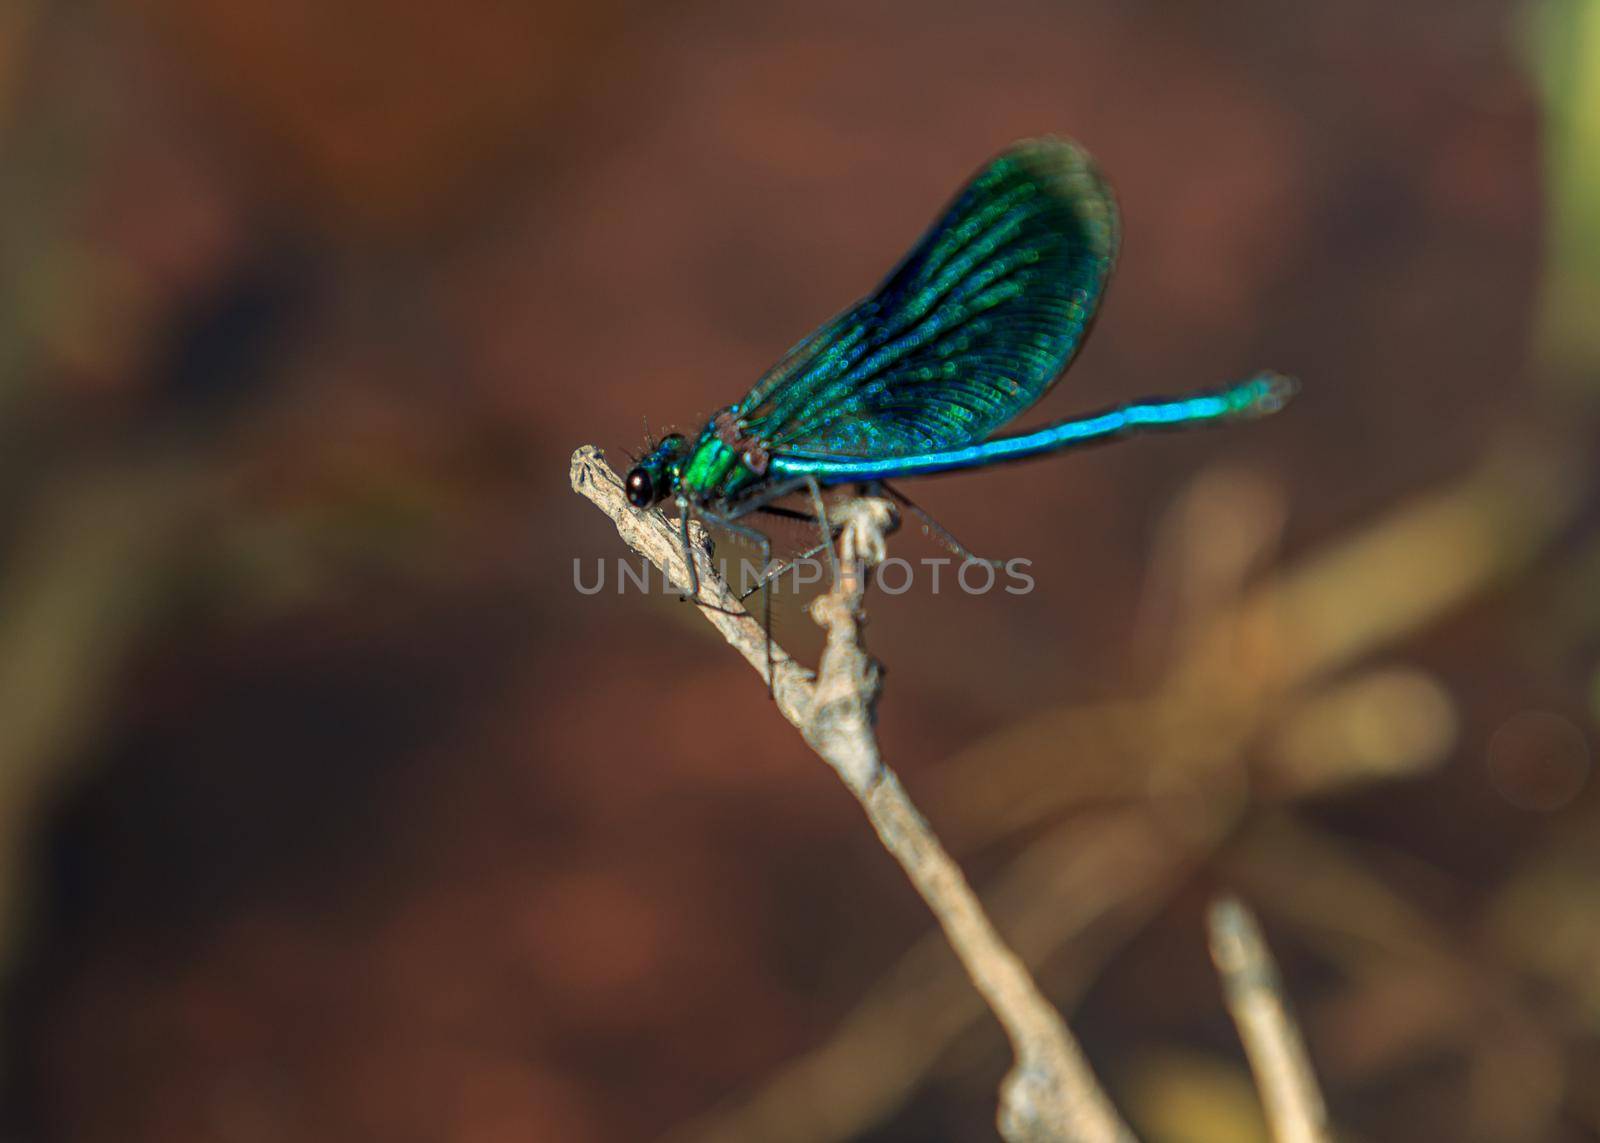 Blue dragonfly sitting on green river water grass